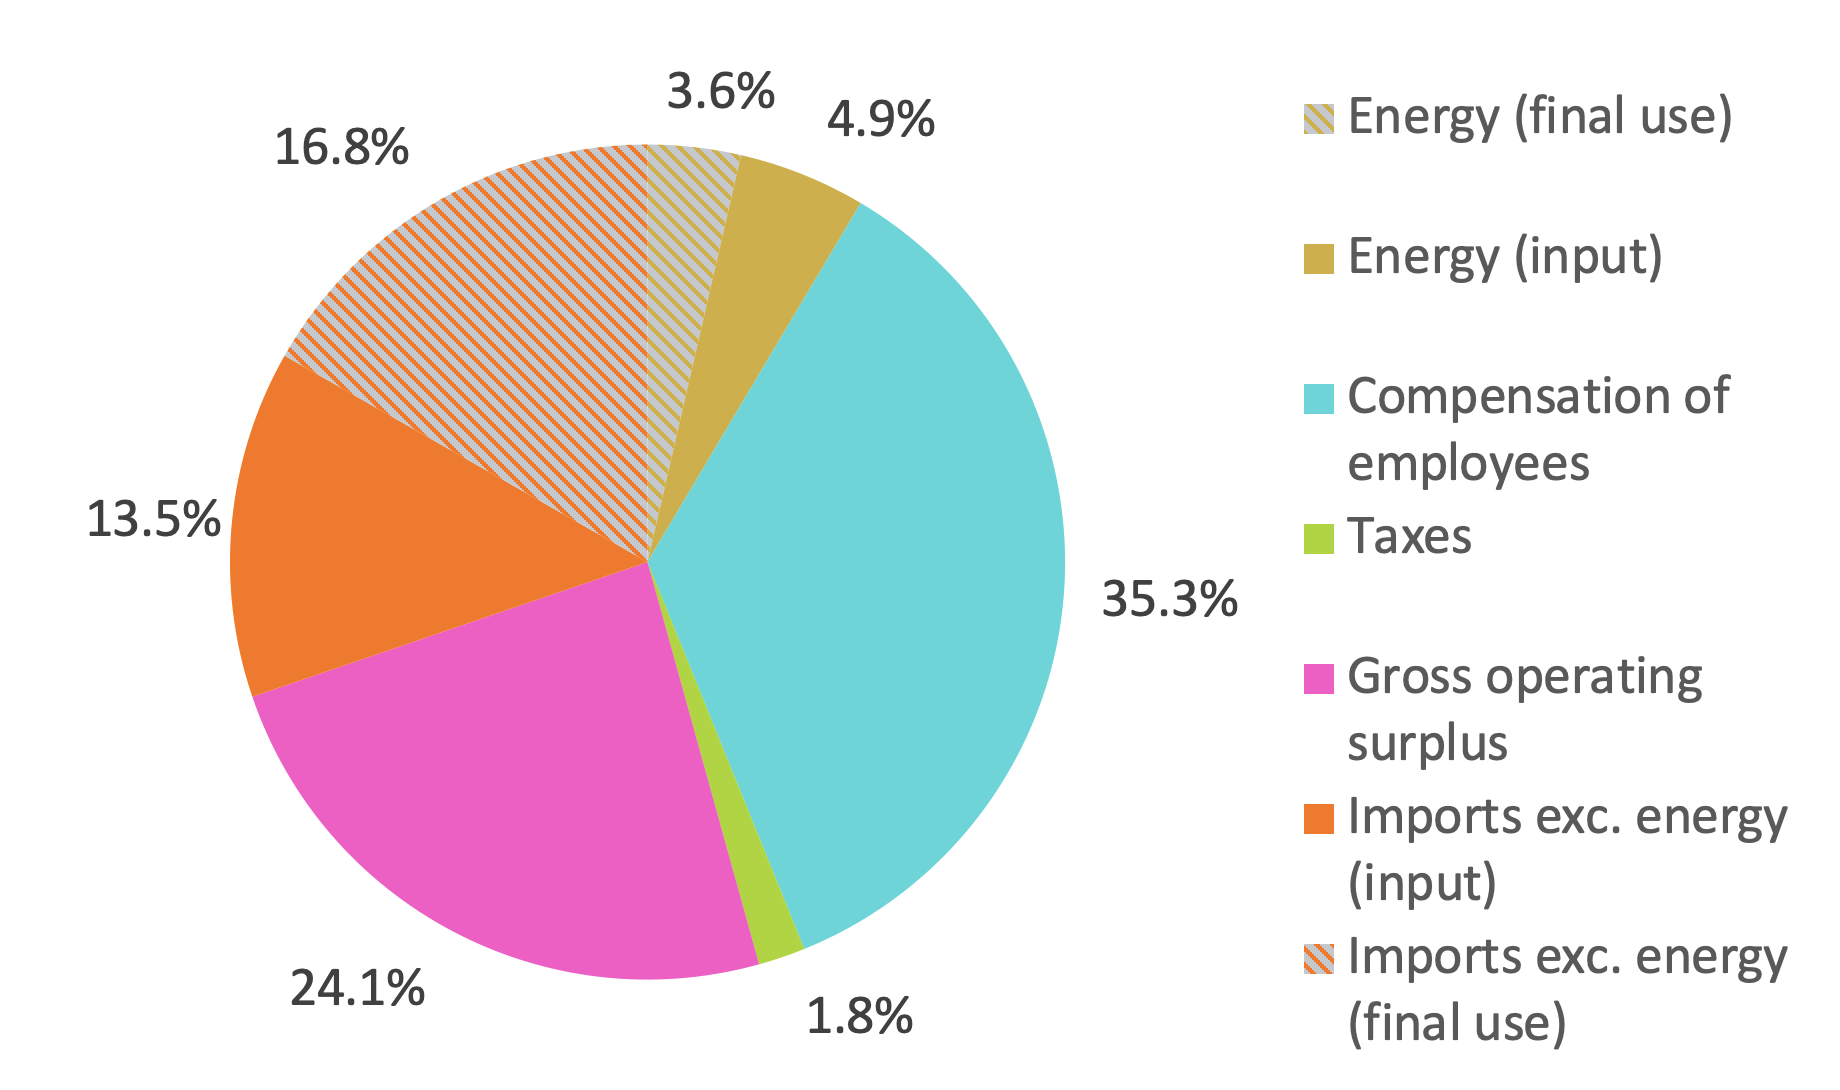 Figure 1 Shares of energy (final and total use), imports (final and total use), employee compensation, taxes, and gross operating surplus in the UK’s CPI basket